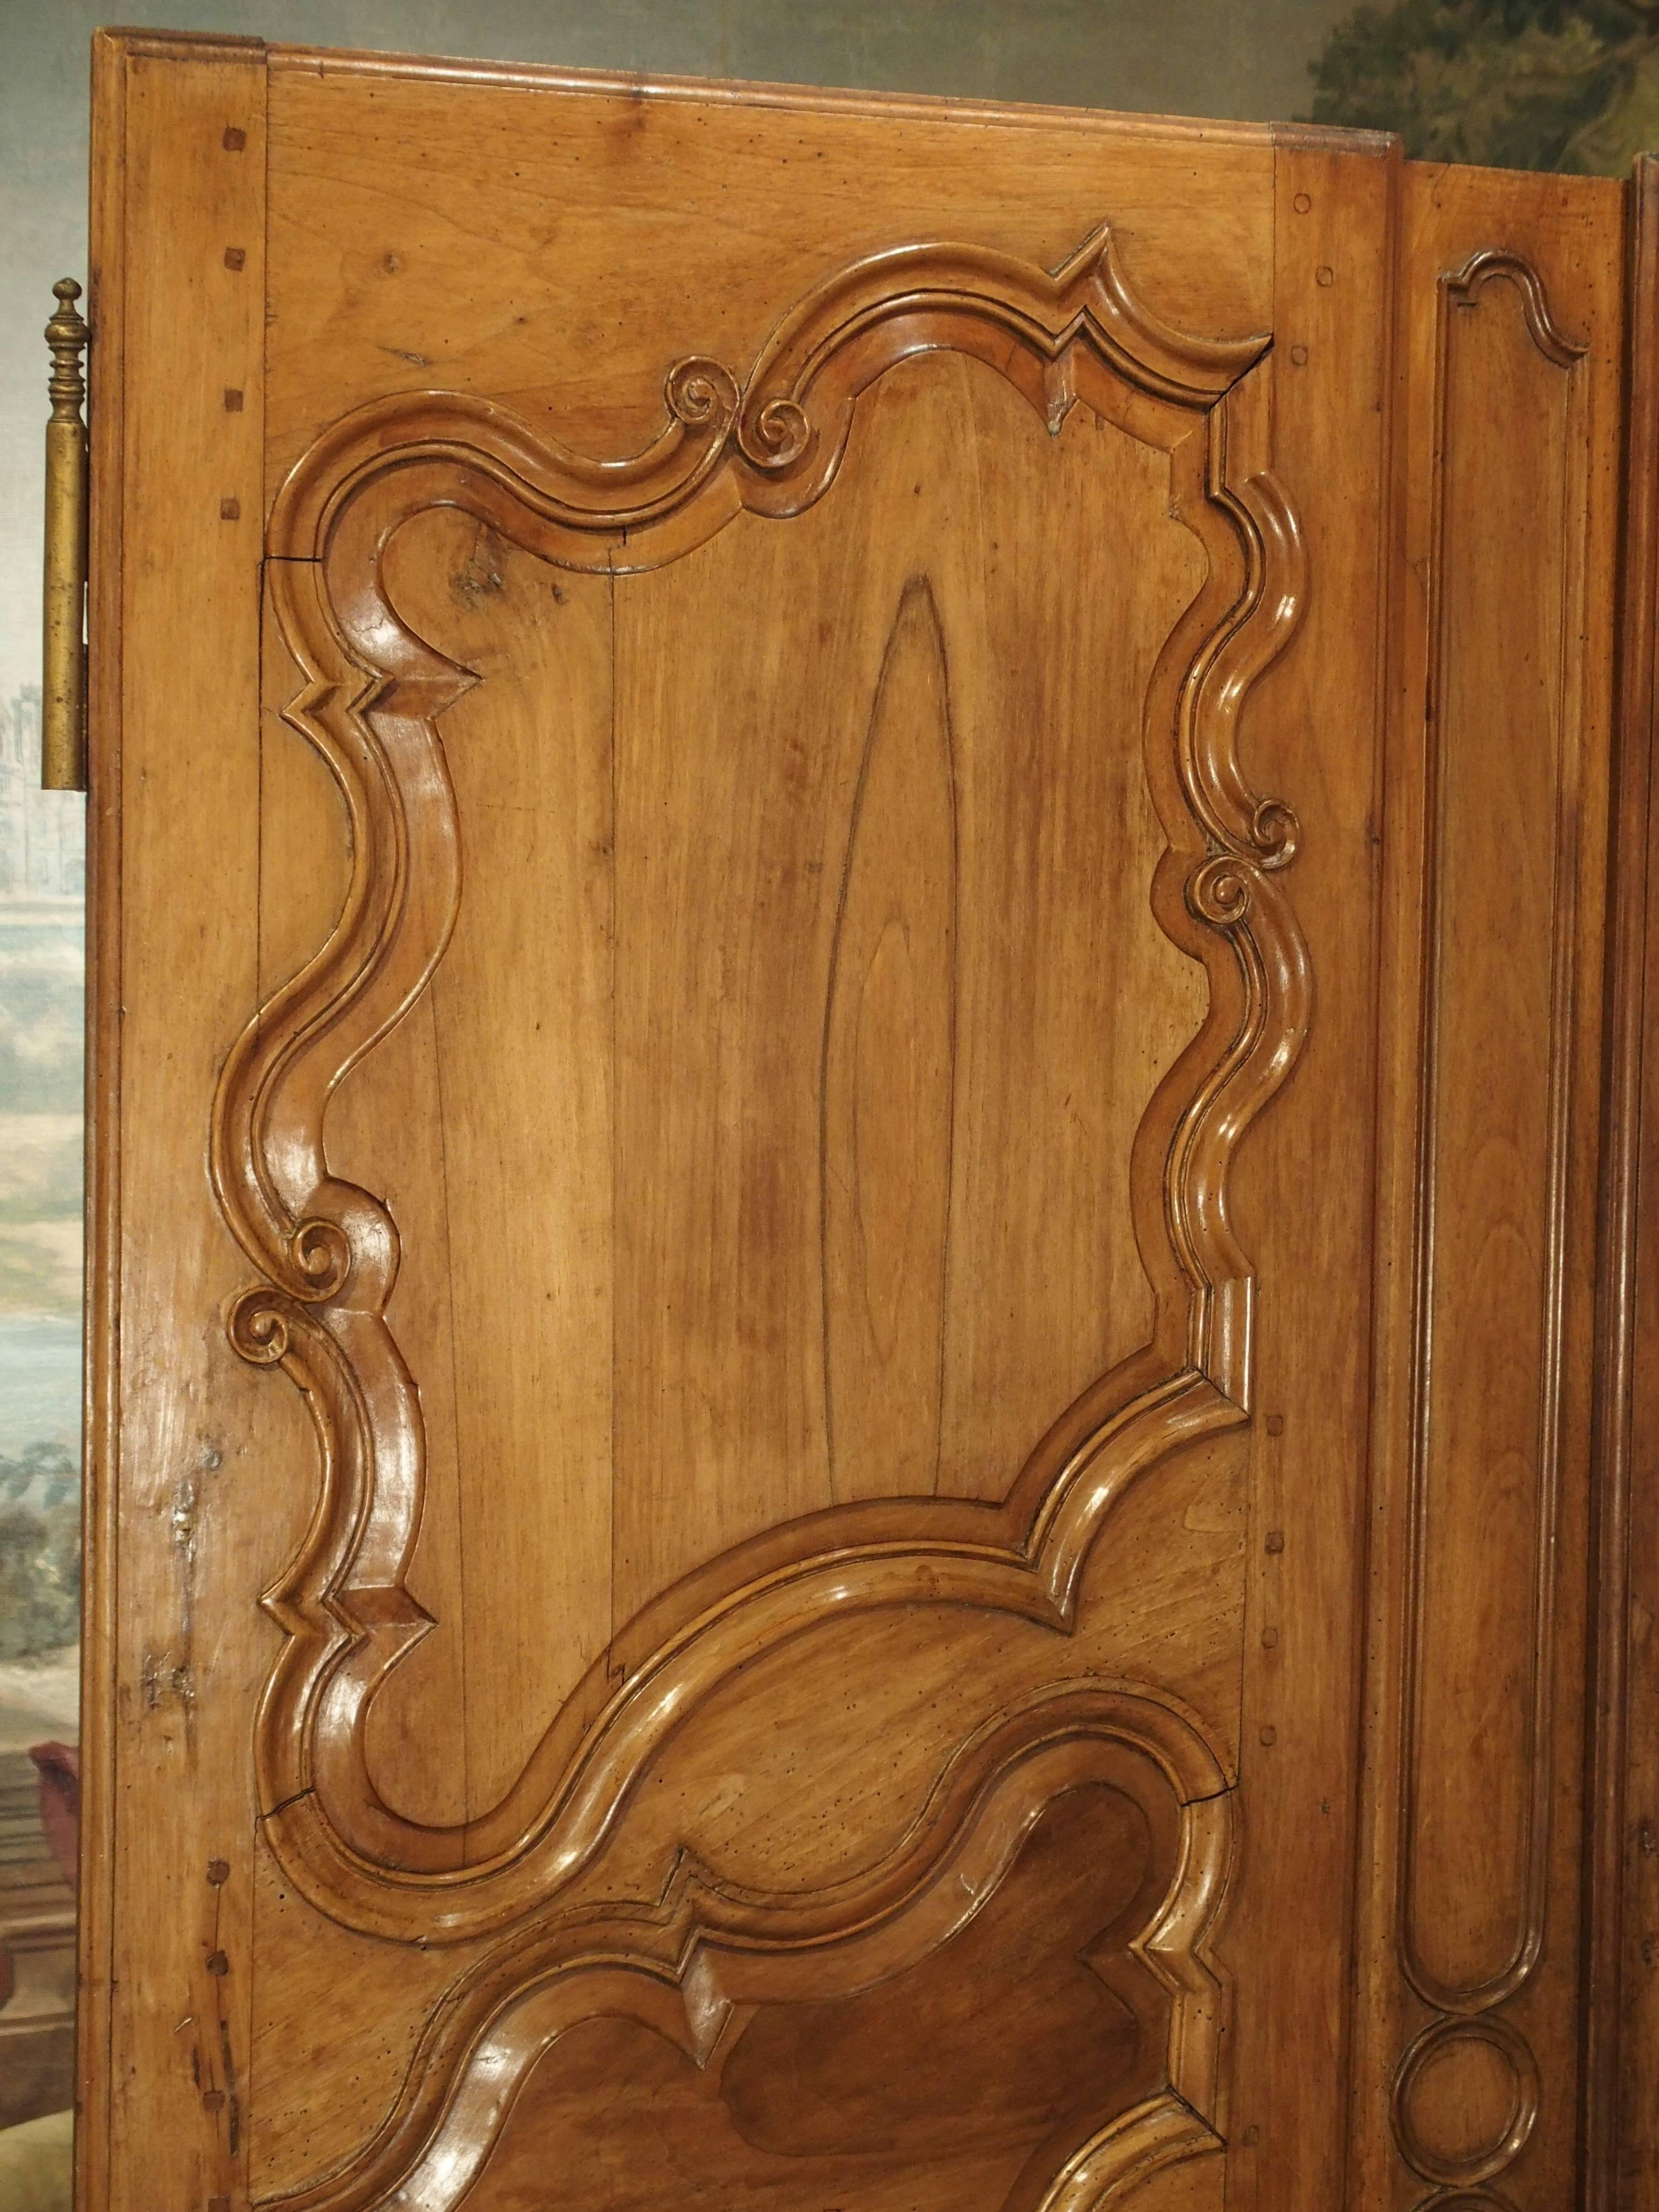 Hand-Carved Pair of 18th Century Armoire Doors from Arles, France